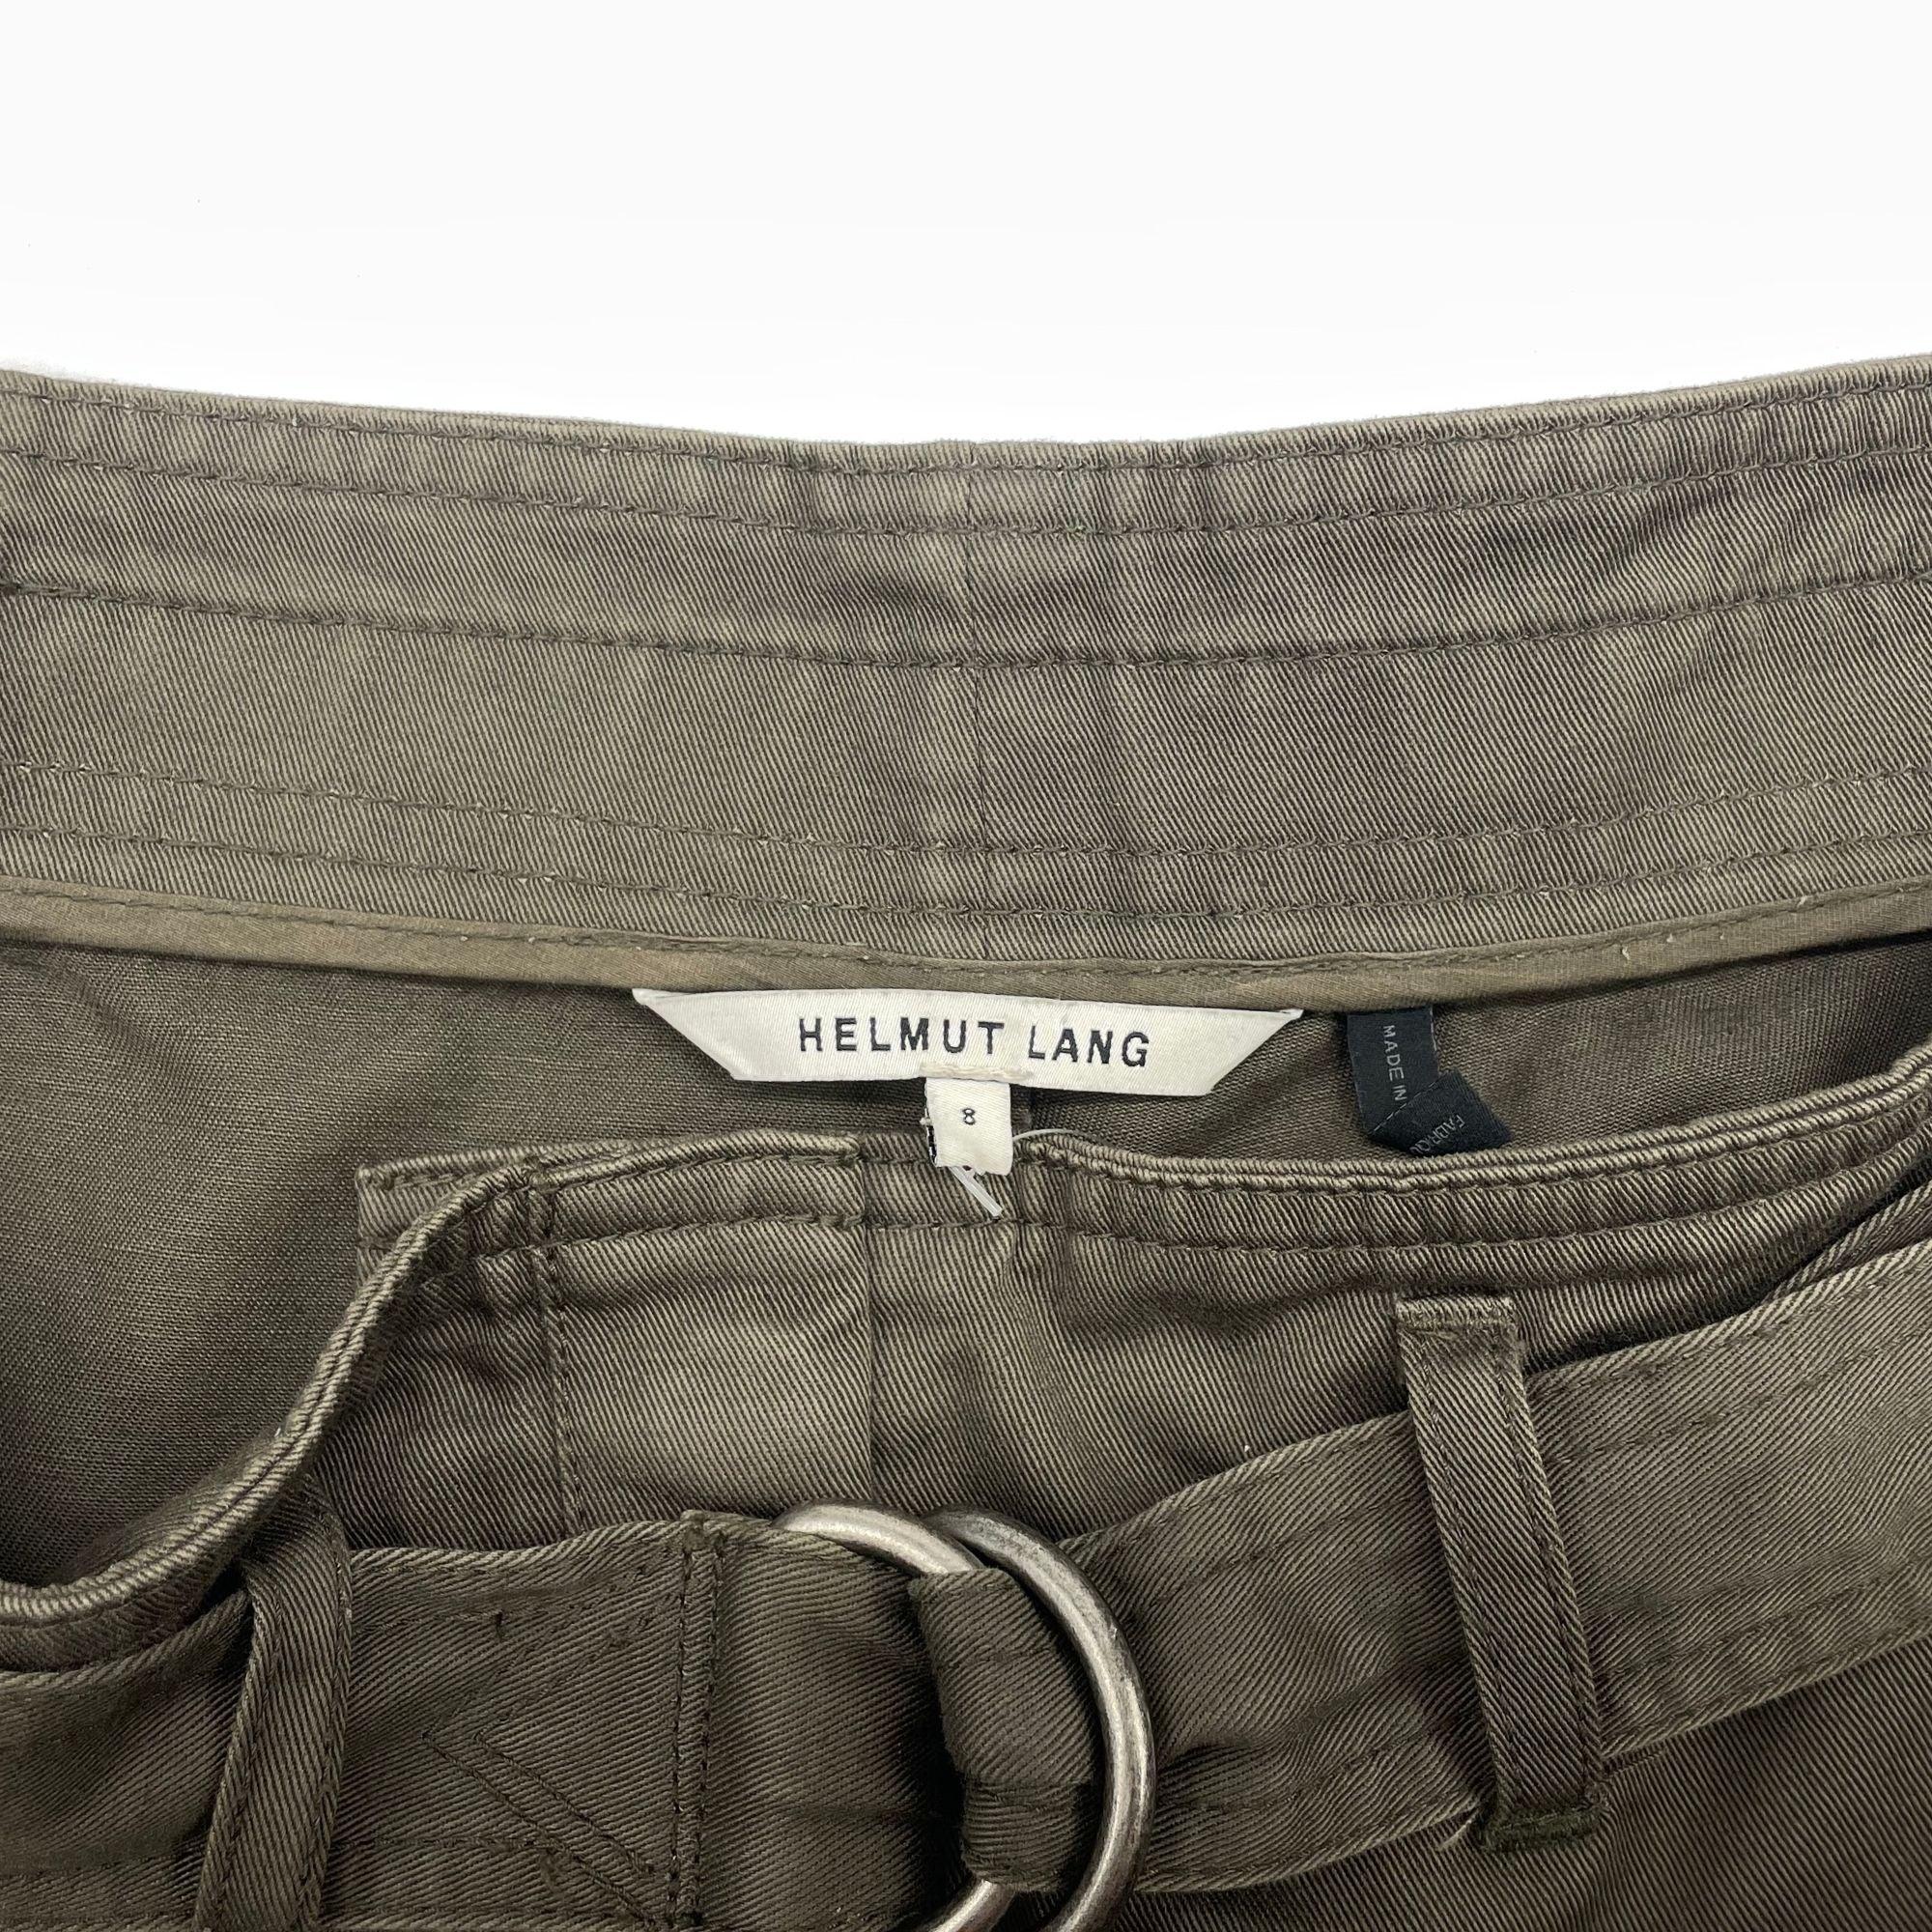 Helmut Lang Pants - Women's 8 - Fashionably Yours